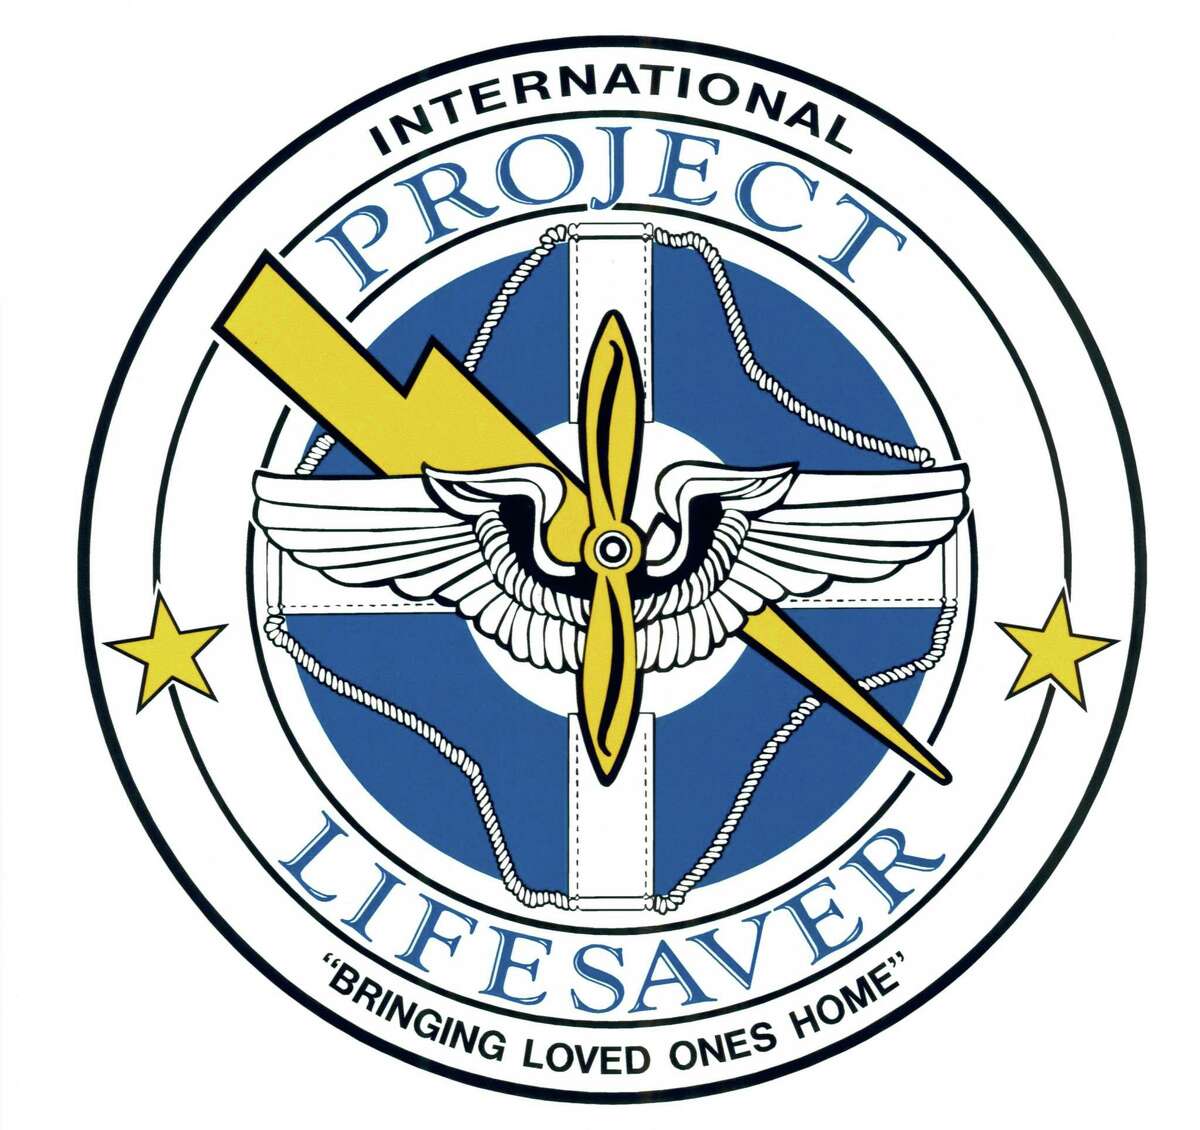 A logo for Project Lifesaver, left, and t